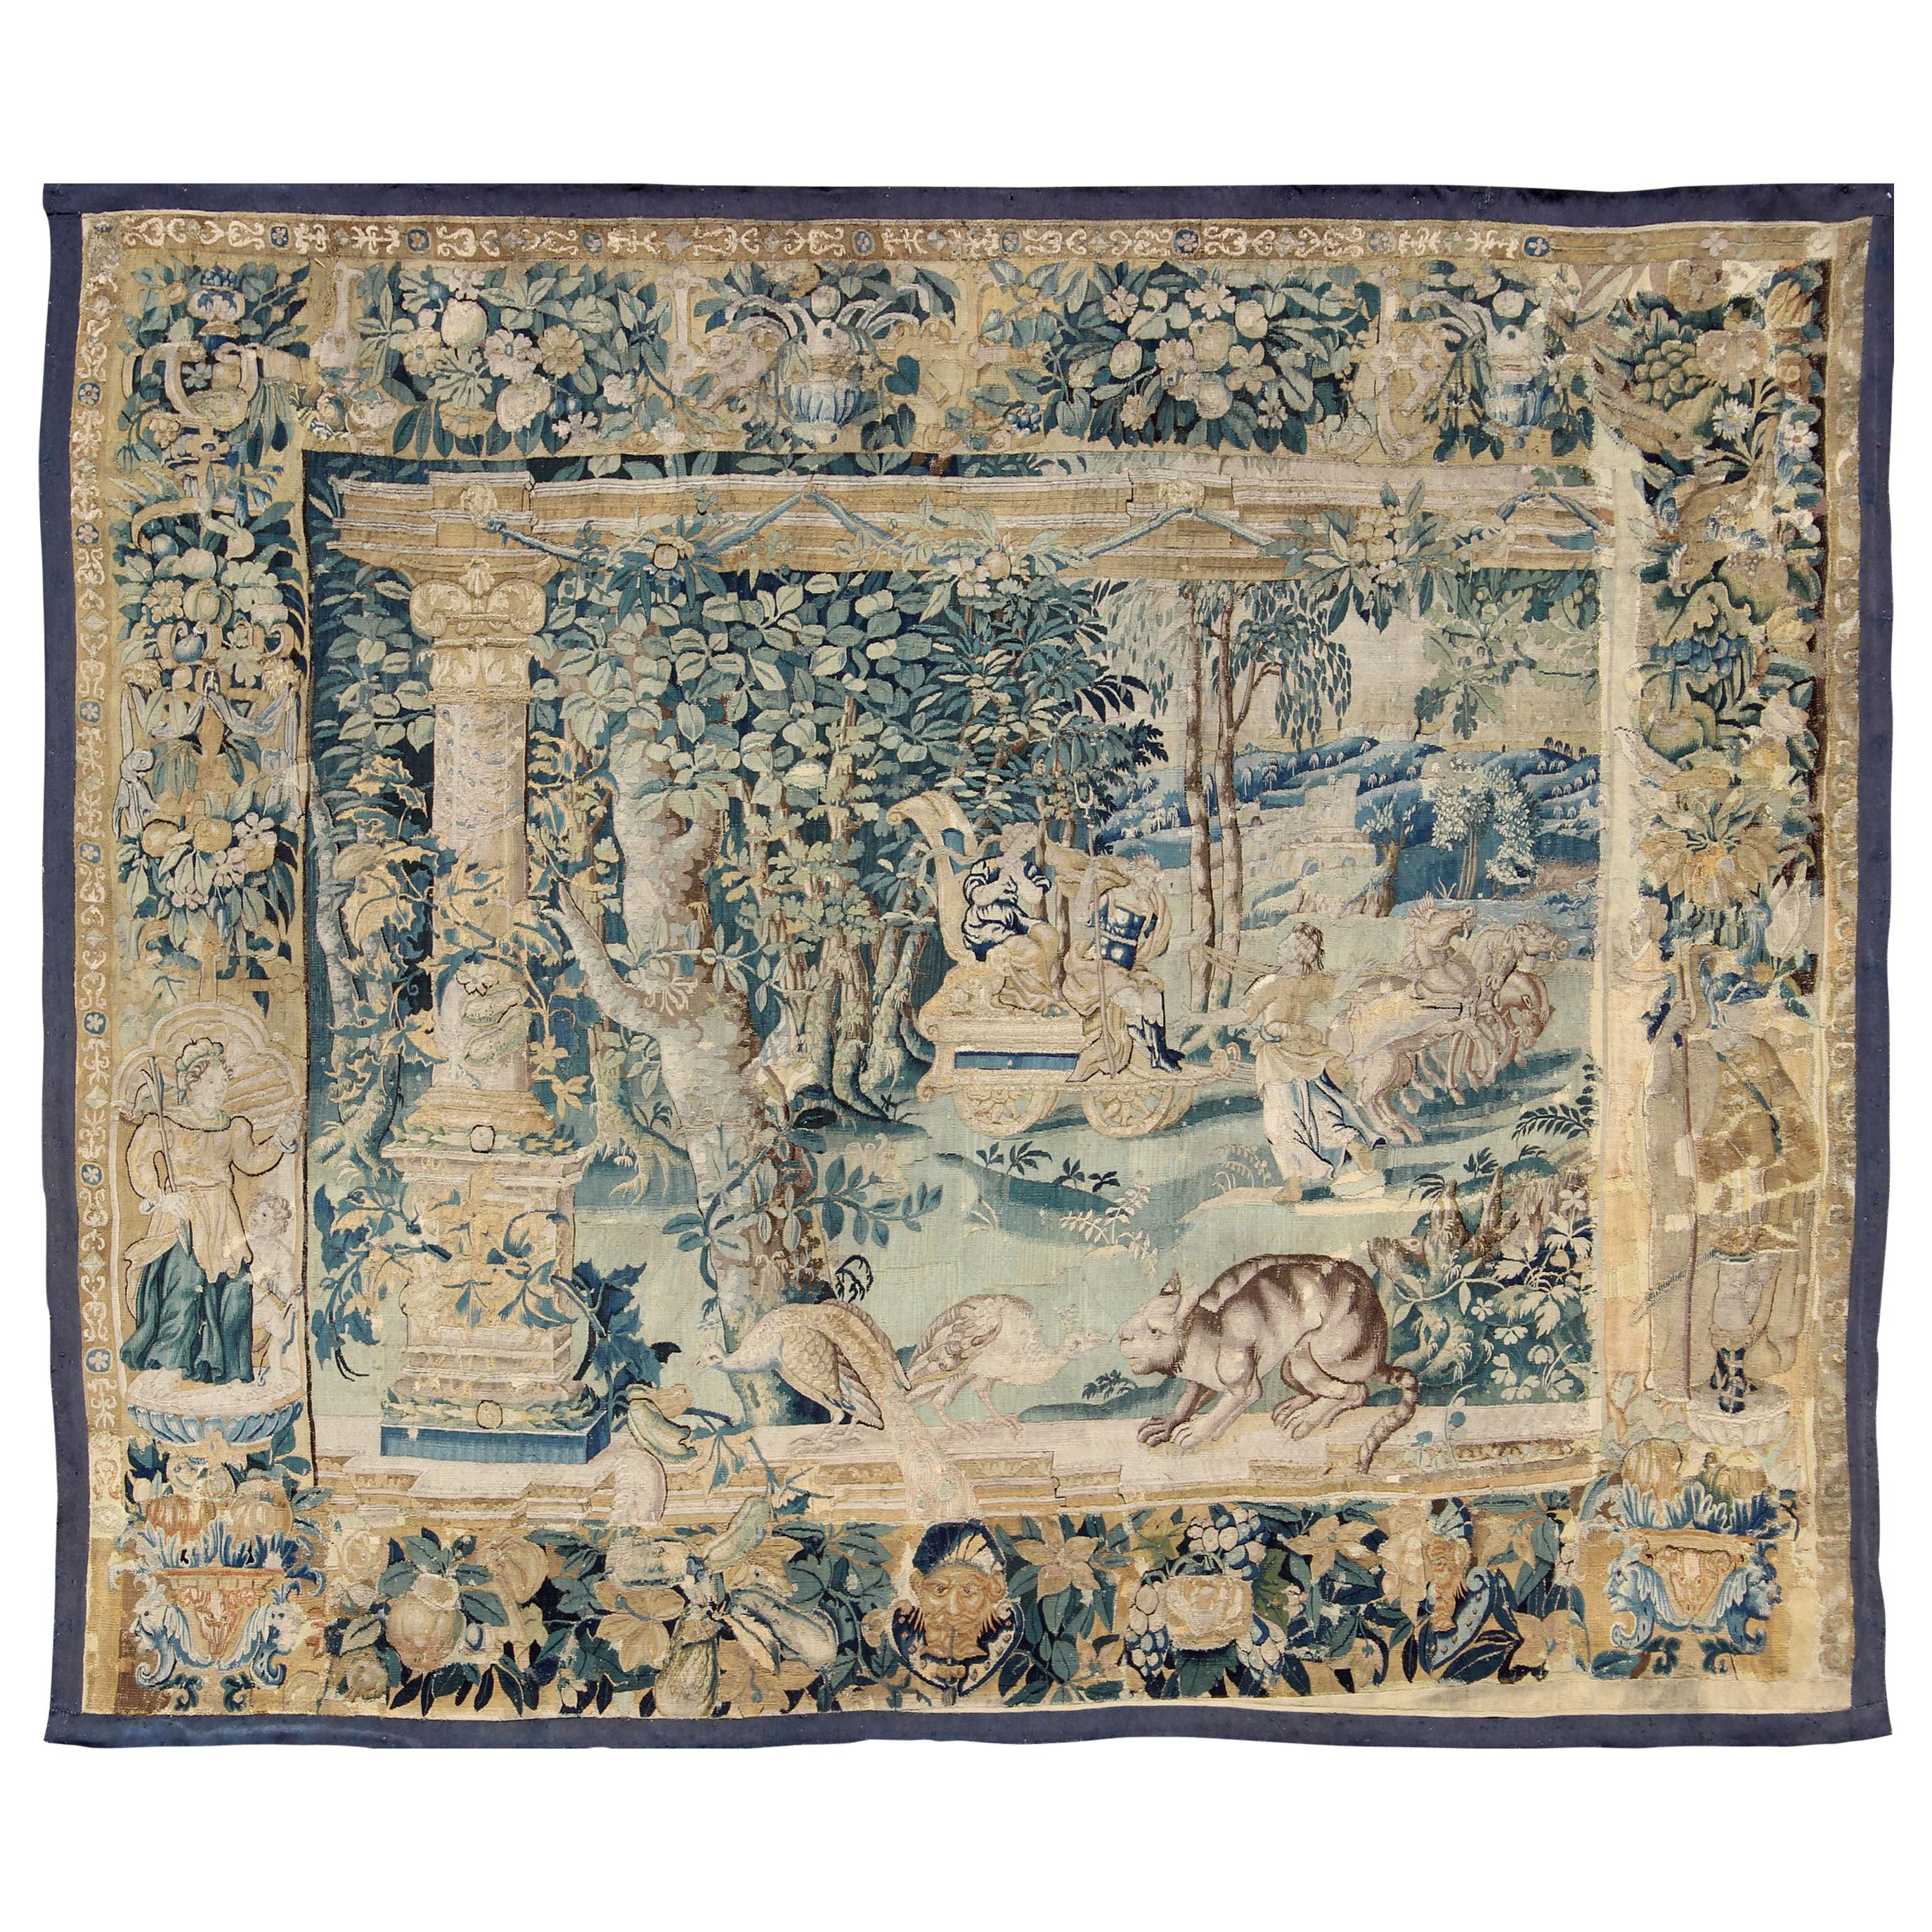 Antique Mid-18th Century European French Beauvais Tapestry